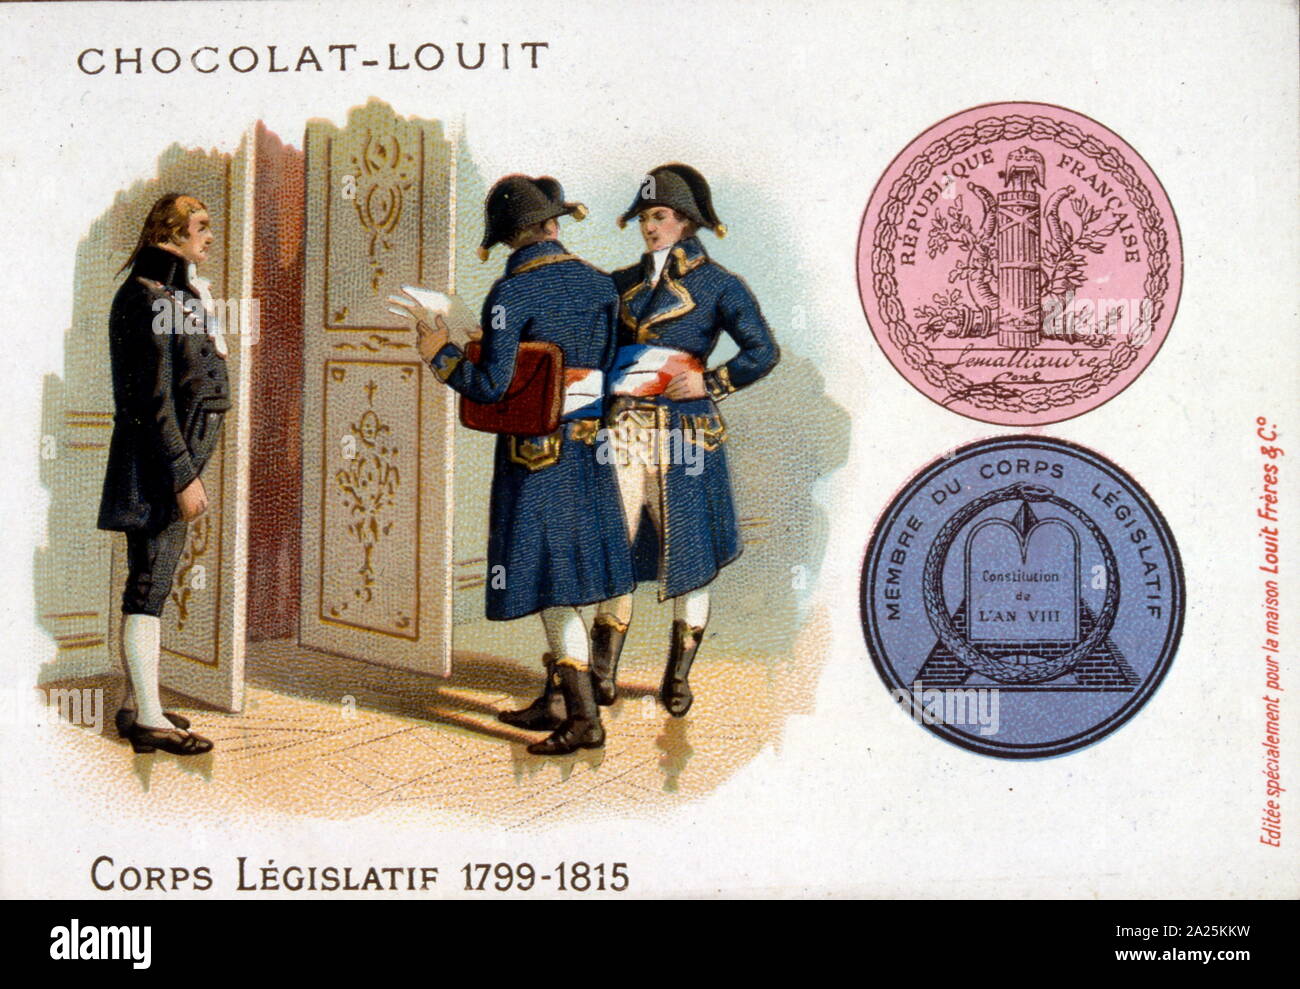 The Corps législatif was a part of the French legislature during the French Revolution and beyond. Stock Photo